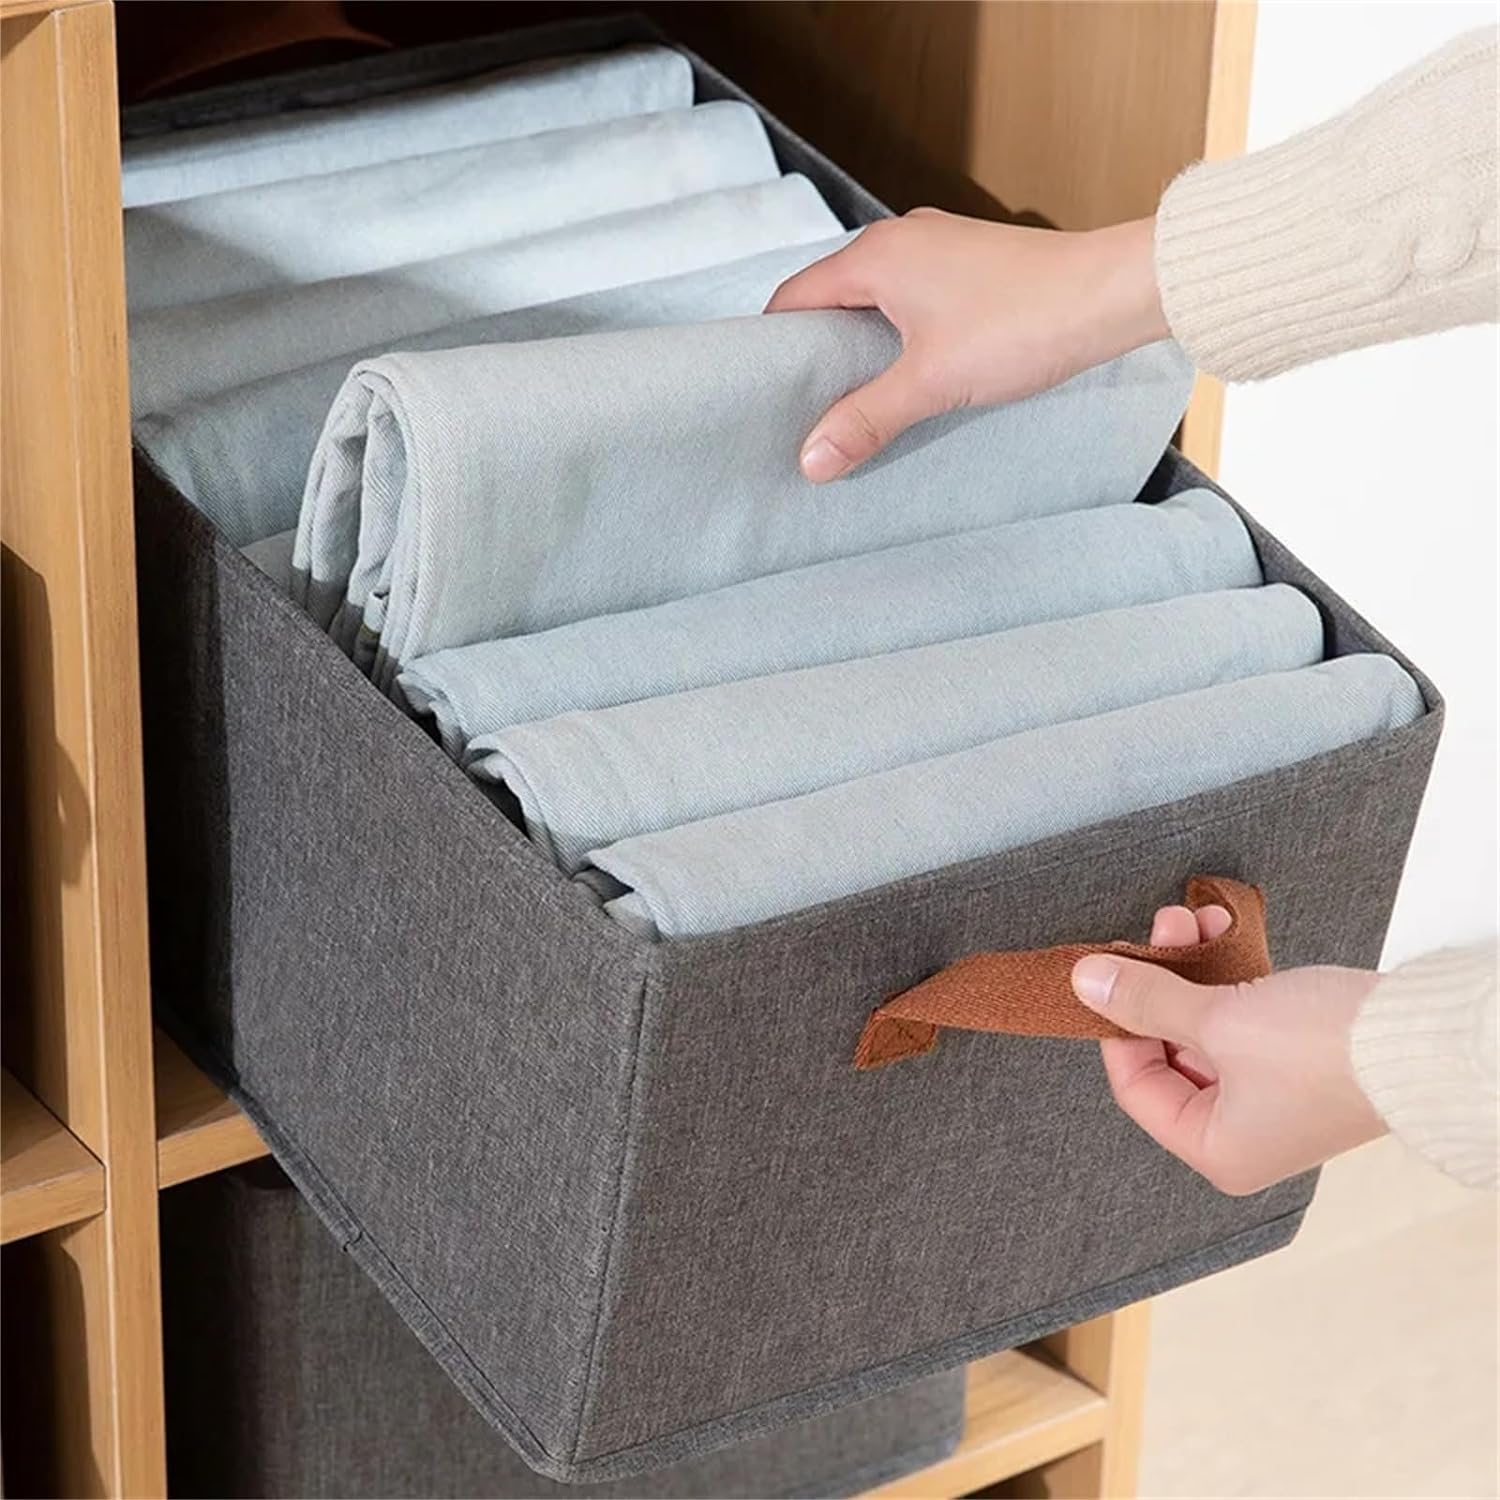 Foldable storage boxes with metal frames